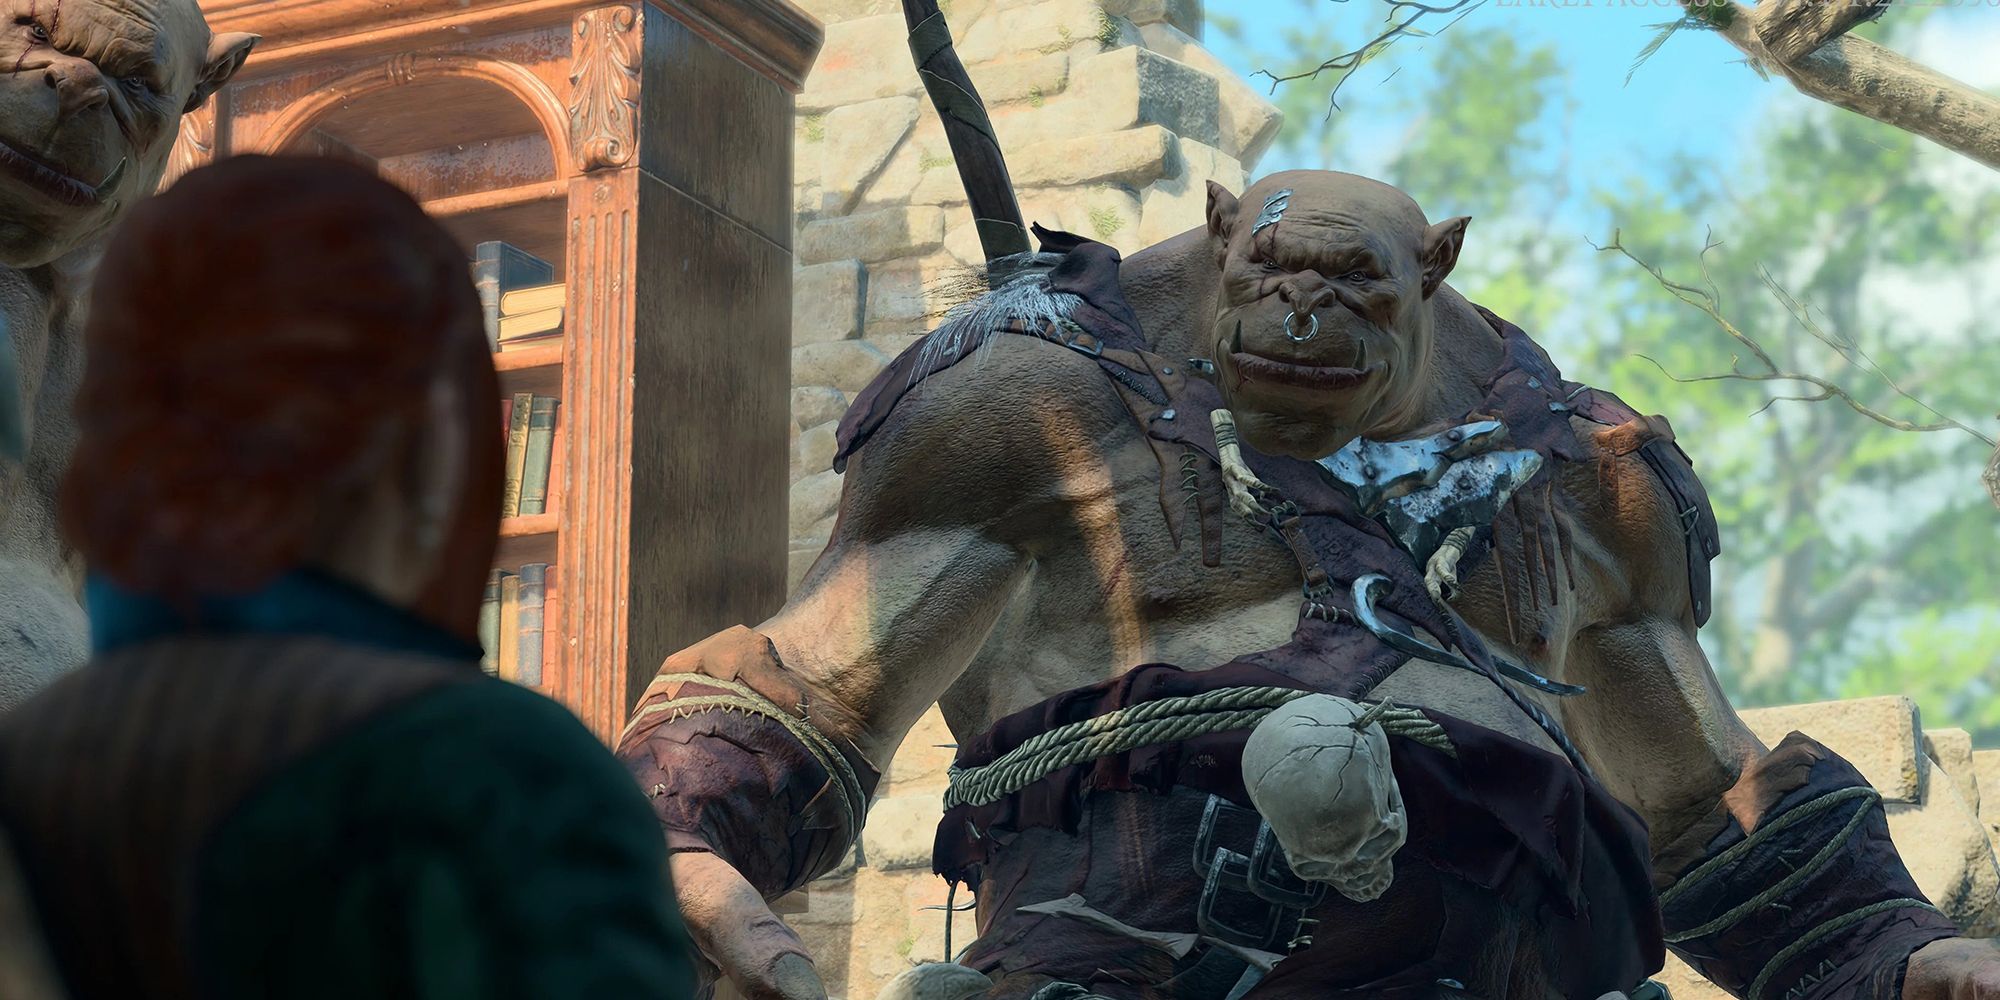 Lumb the Enlightened, a massive ogre with hide armor